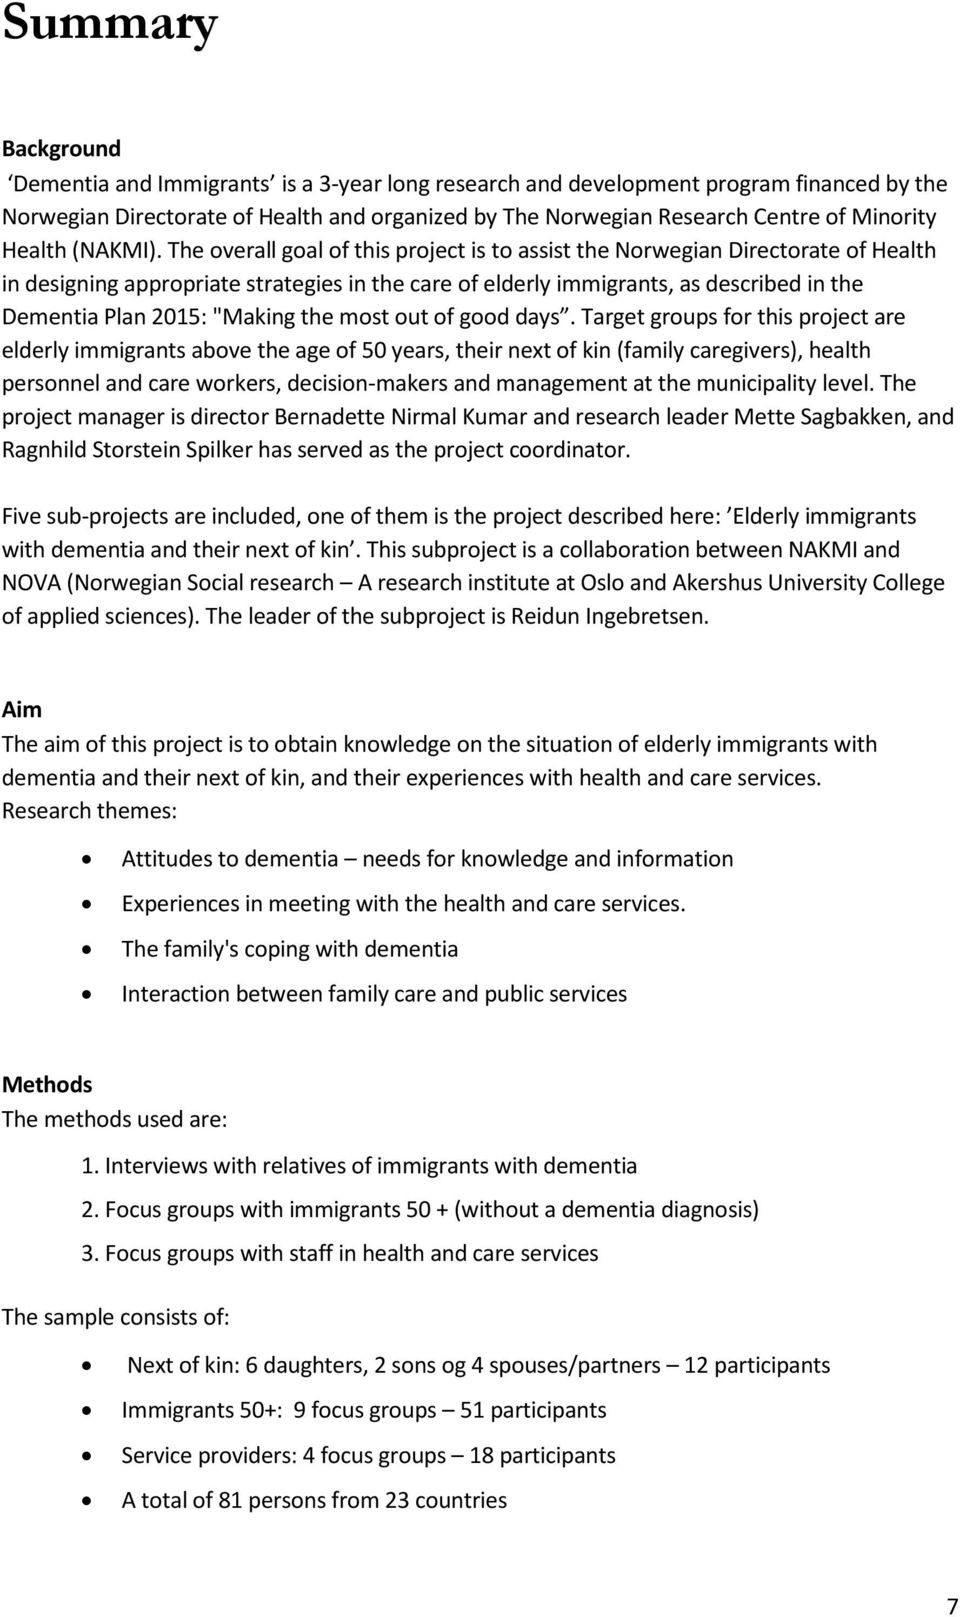 The overall goal of this project is to assist the Norwegian Directorate of Health in designing appropriate strategies in the care of elderly immigrants, as described in the Dementia Plan 2015: